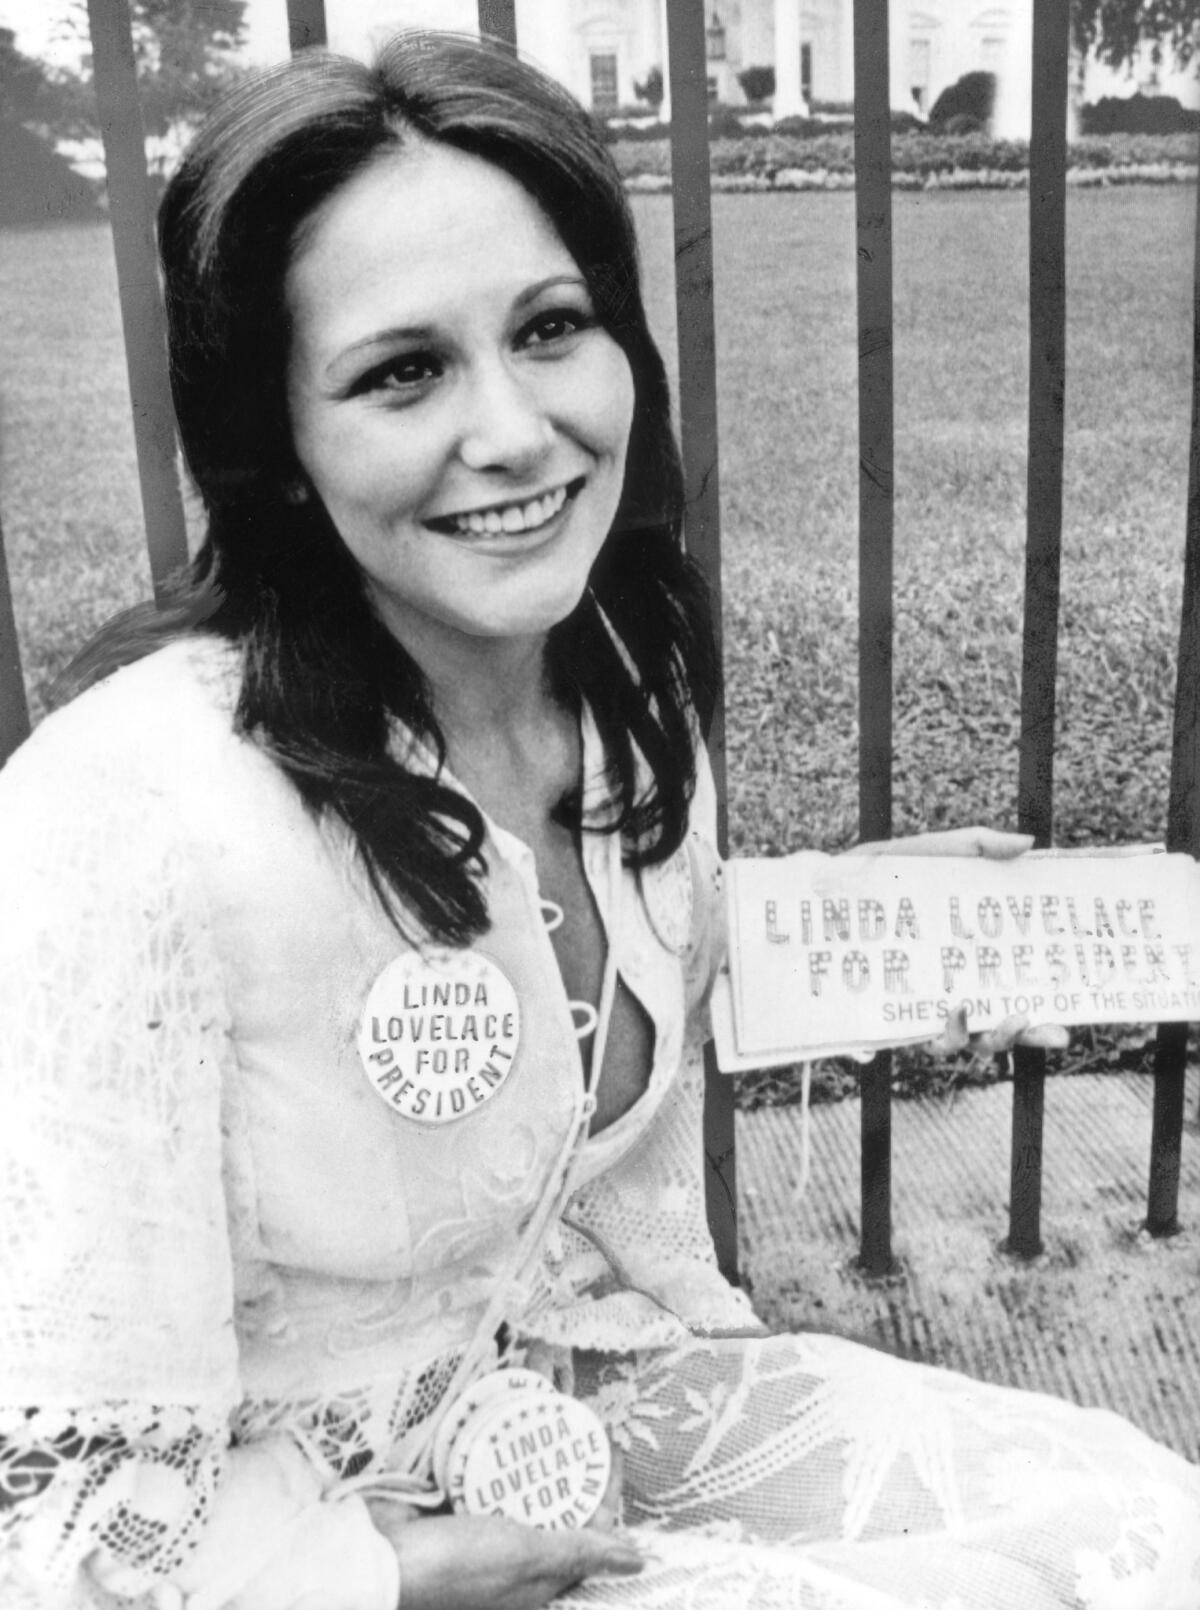 Linda Lovelace, then 24, outside the White House in 1974 publicizing her movie "Linda Lovelace for President." Born Linda Boreman, Lovelace died in 2002 from injuries sustained a car accident. (Los Angeles Times)